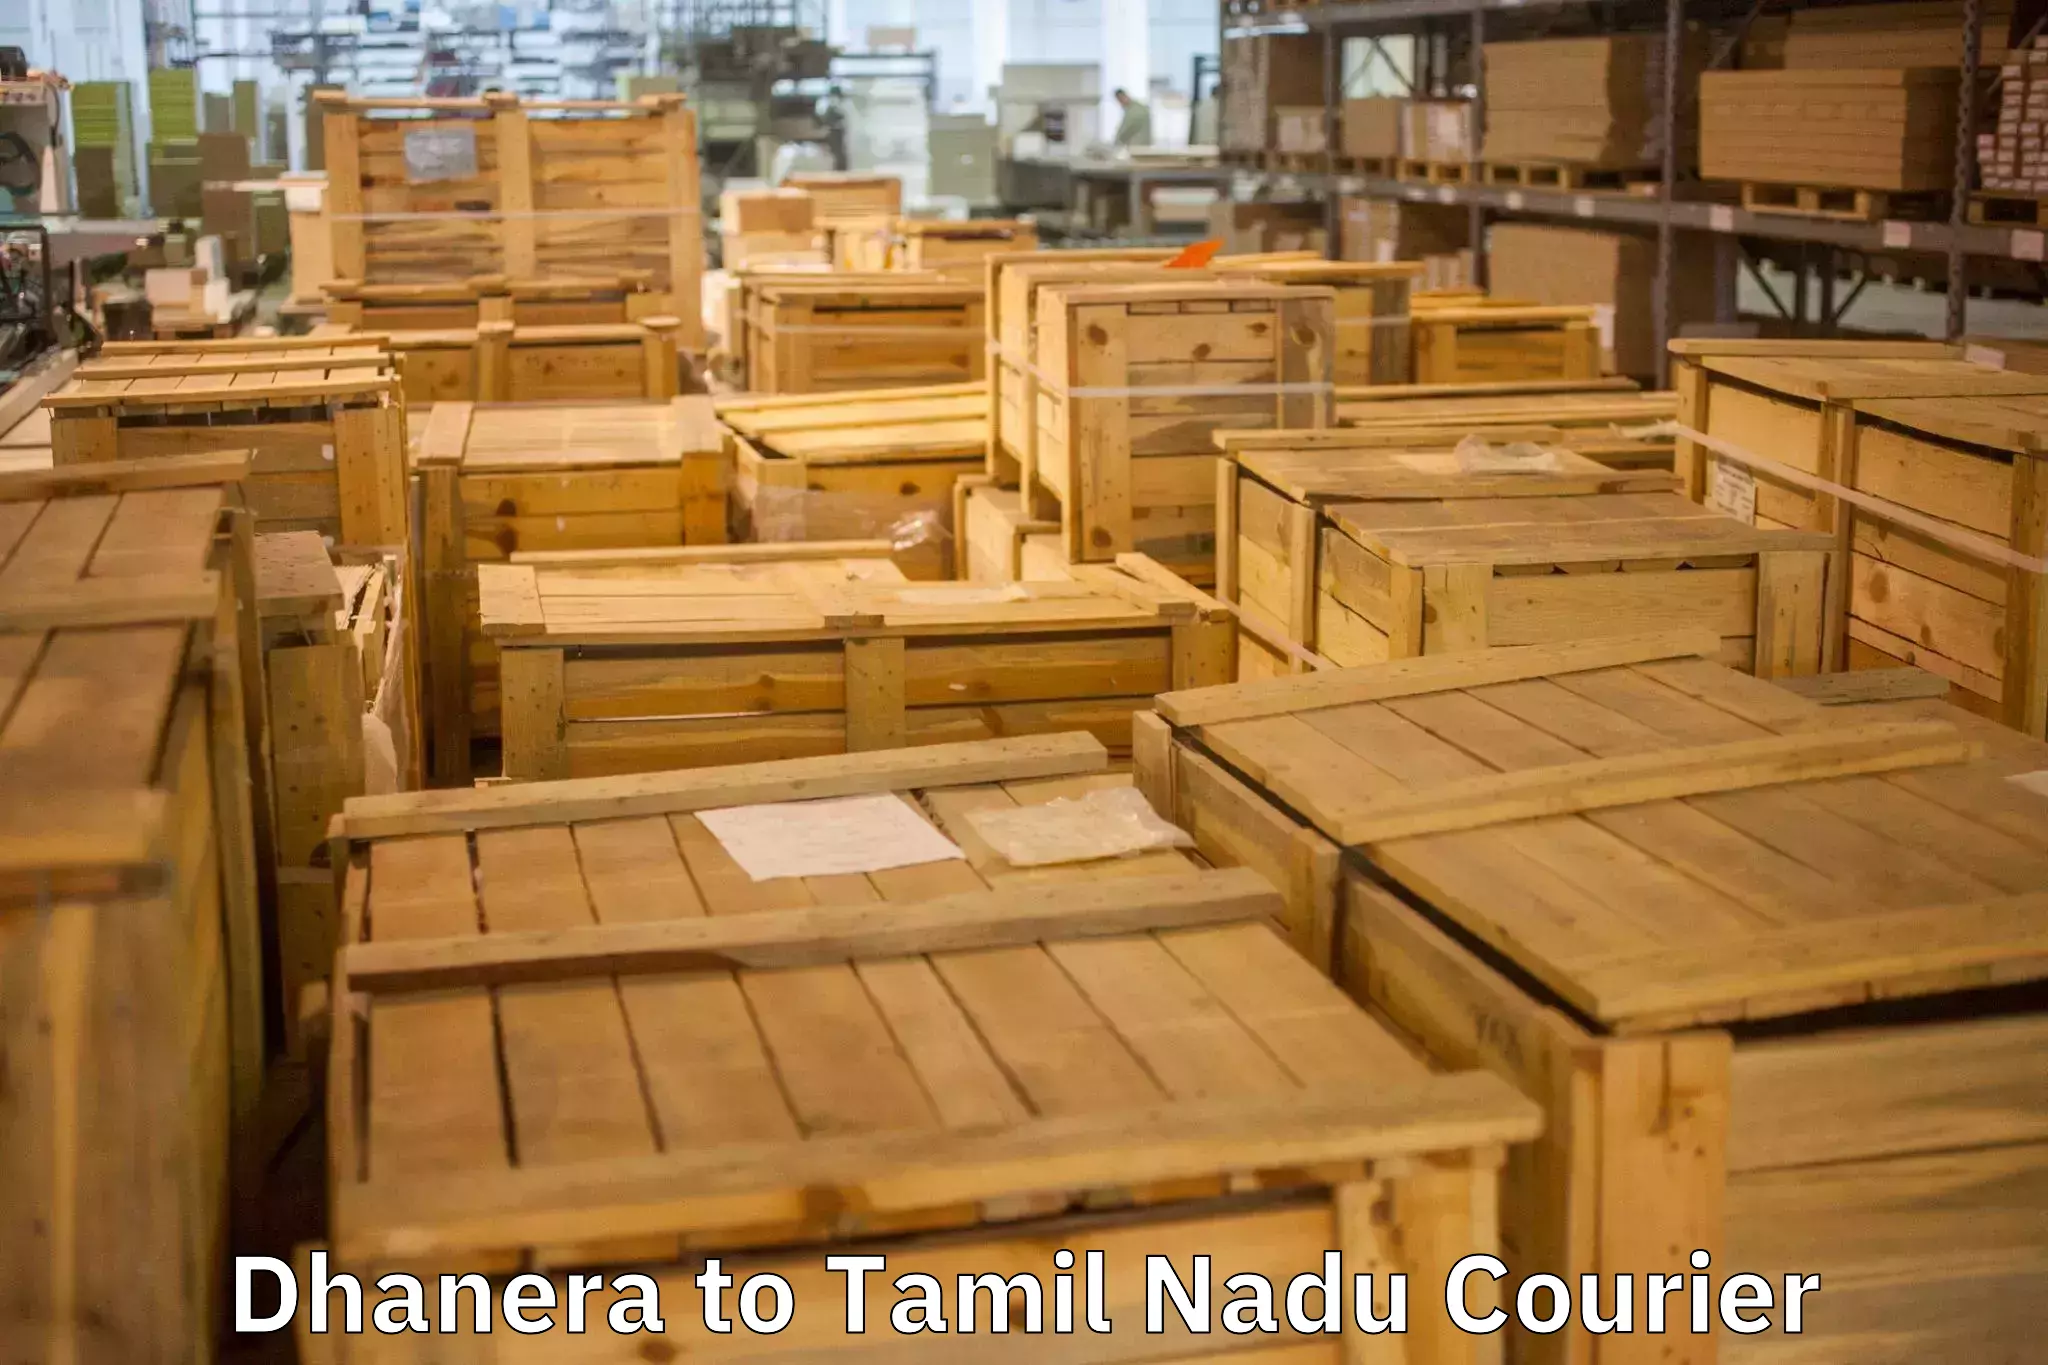 Residential moving experts Dhanera to Tamil Nadu